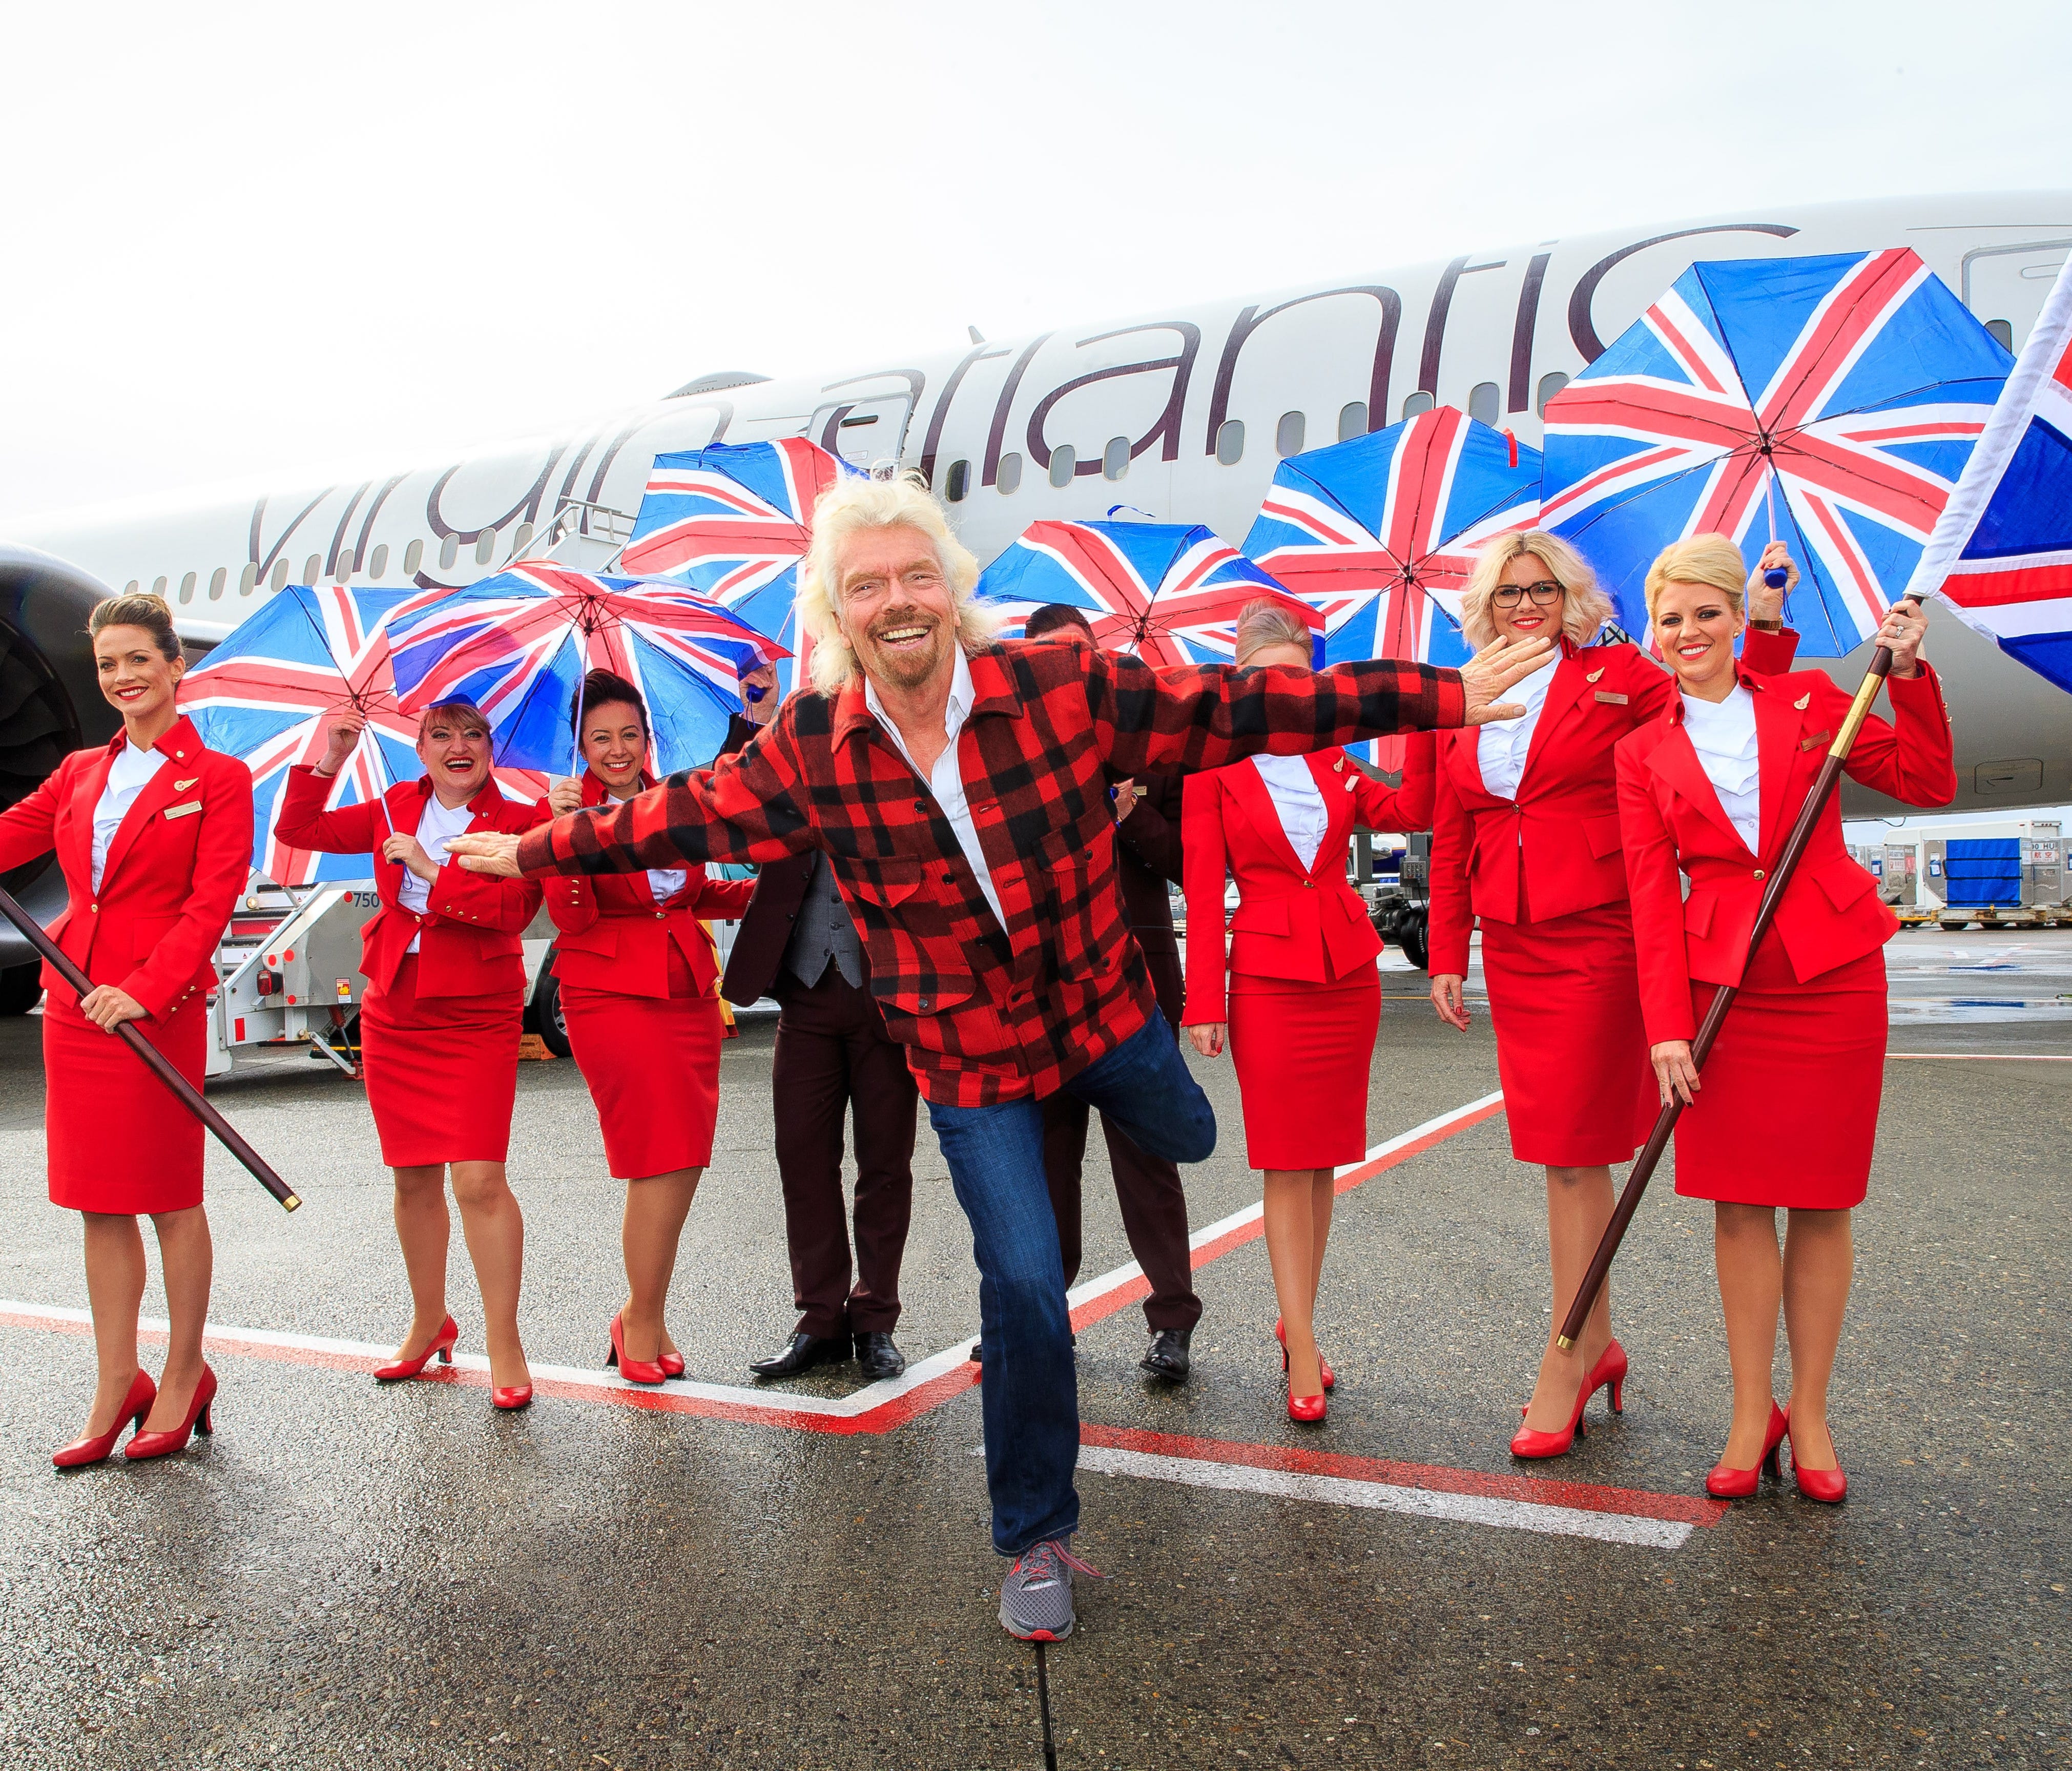 Sir Richard Branson, president of Virgin Atlantic, helps launch the carrier's new service between London Heathrow and Seattle-Tacoma International Airport.